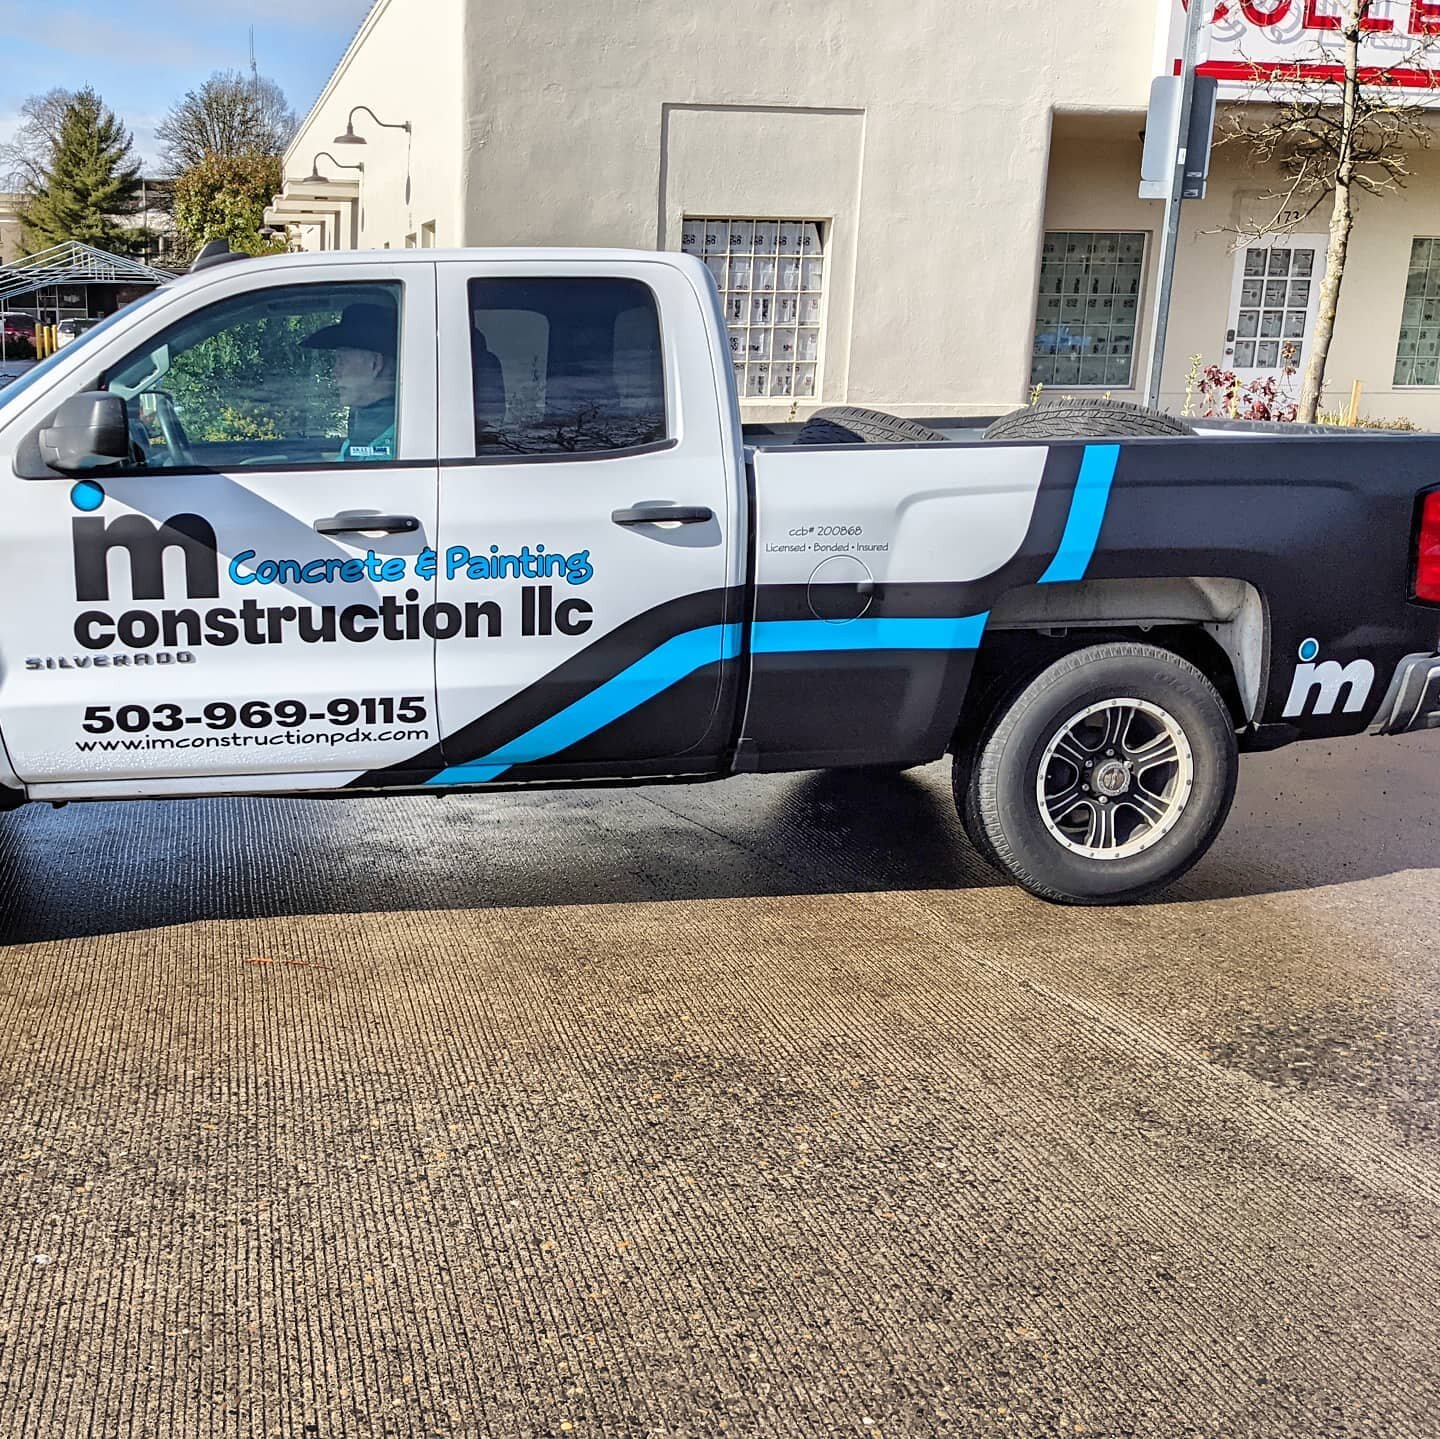 BAM, 'ANOTHER ONE. Fleet truck #2 for @imconstruction. Matte black with gloss overlays, a great look!